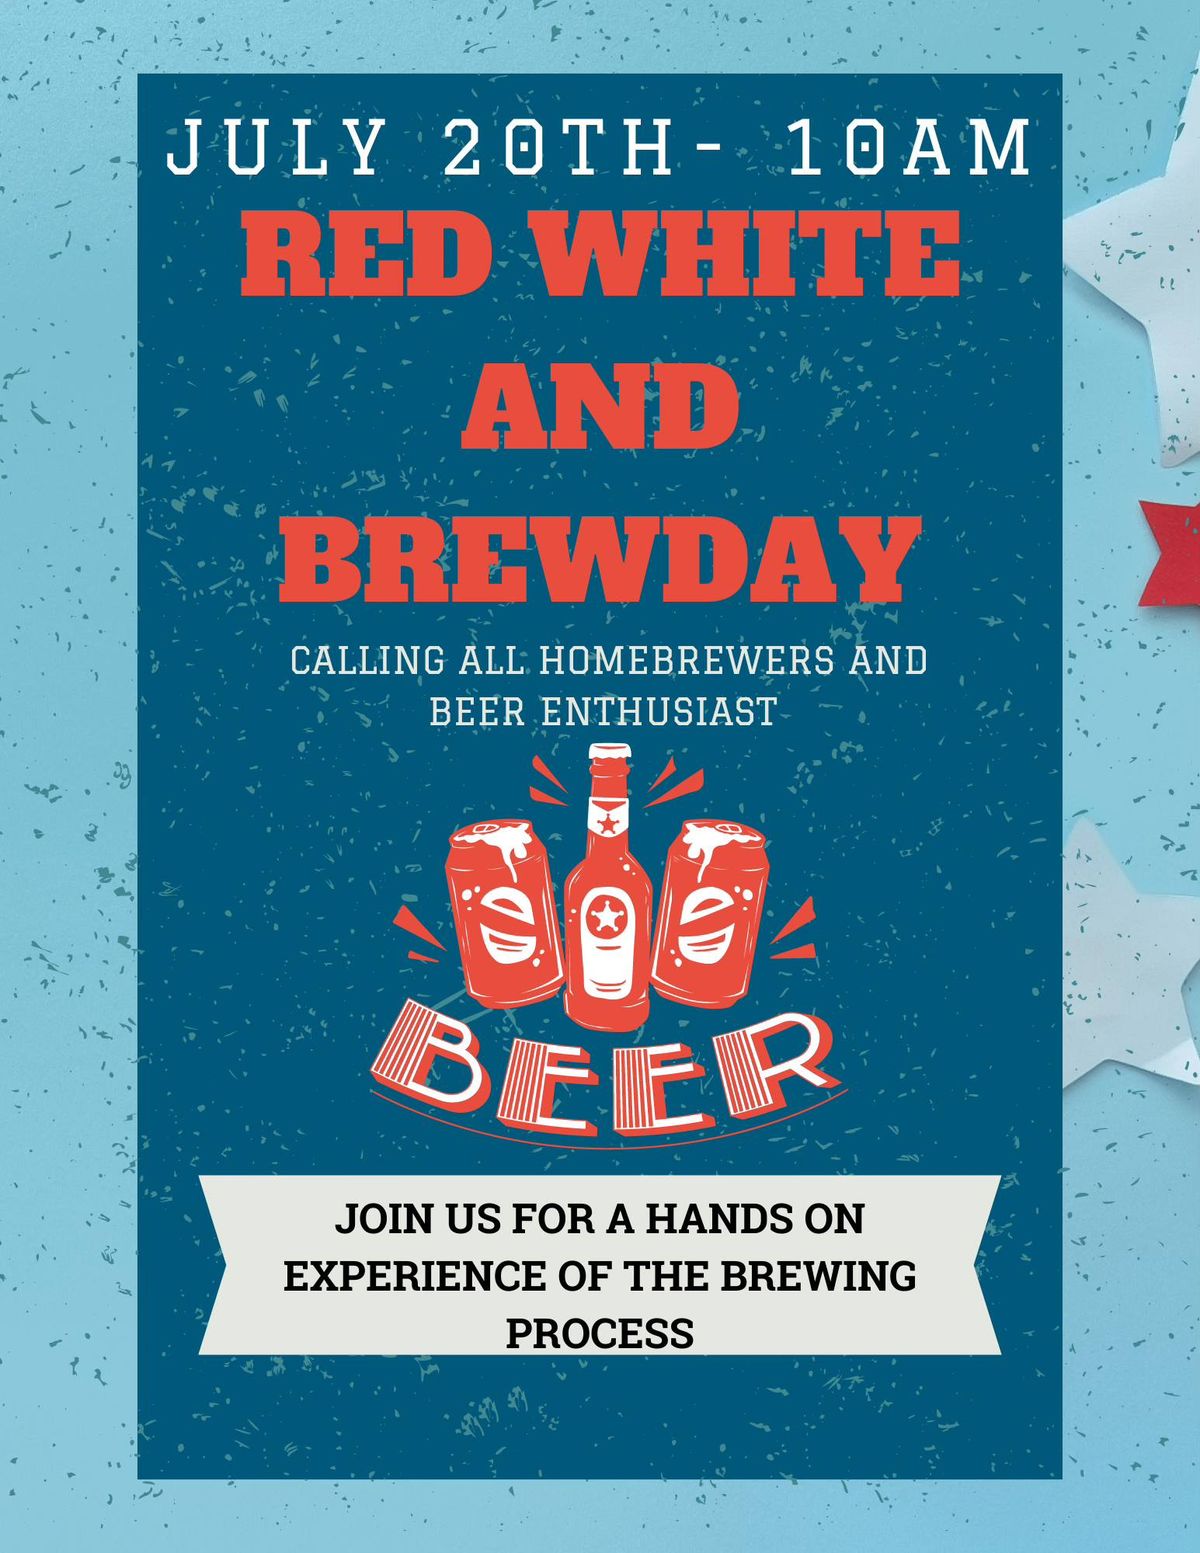 Red, White & Brew Day!!!